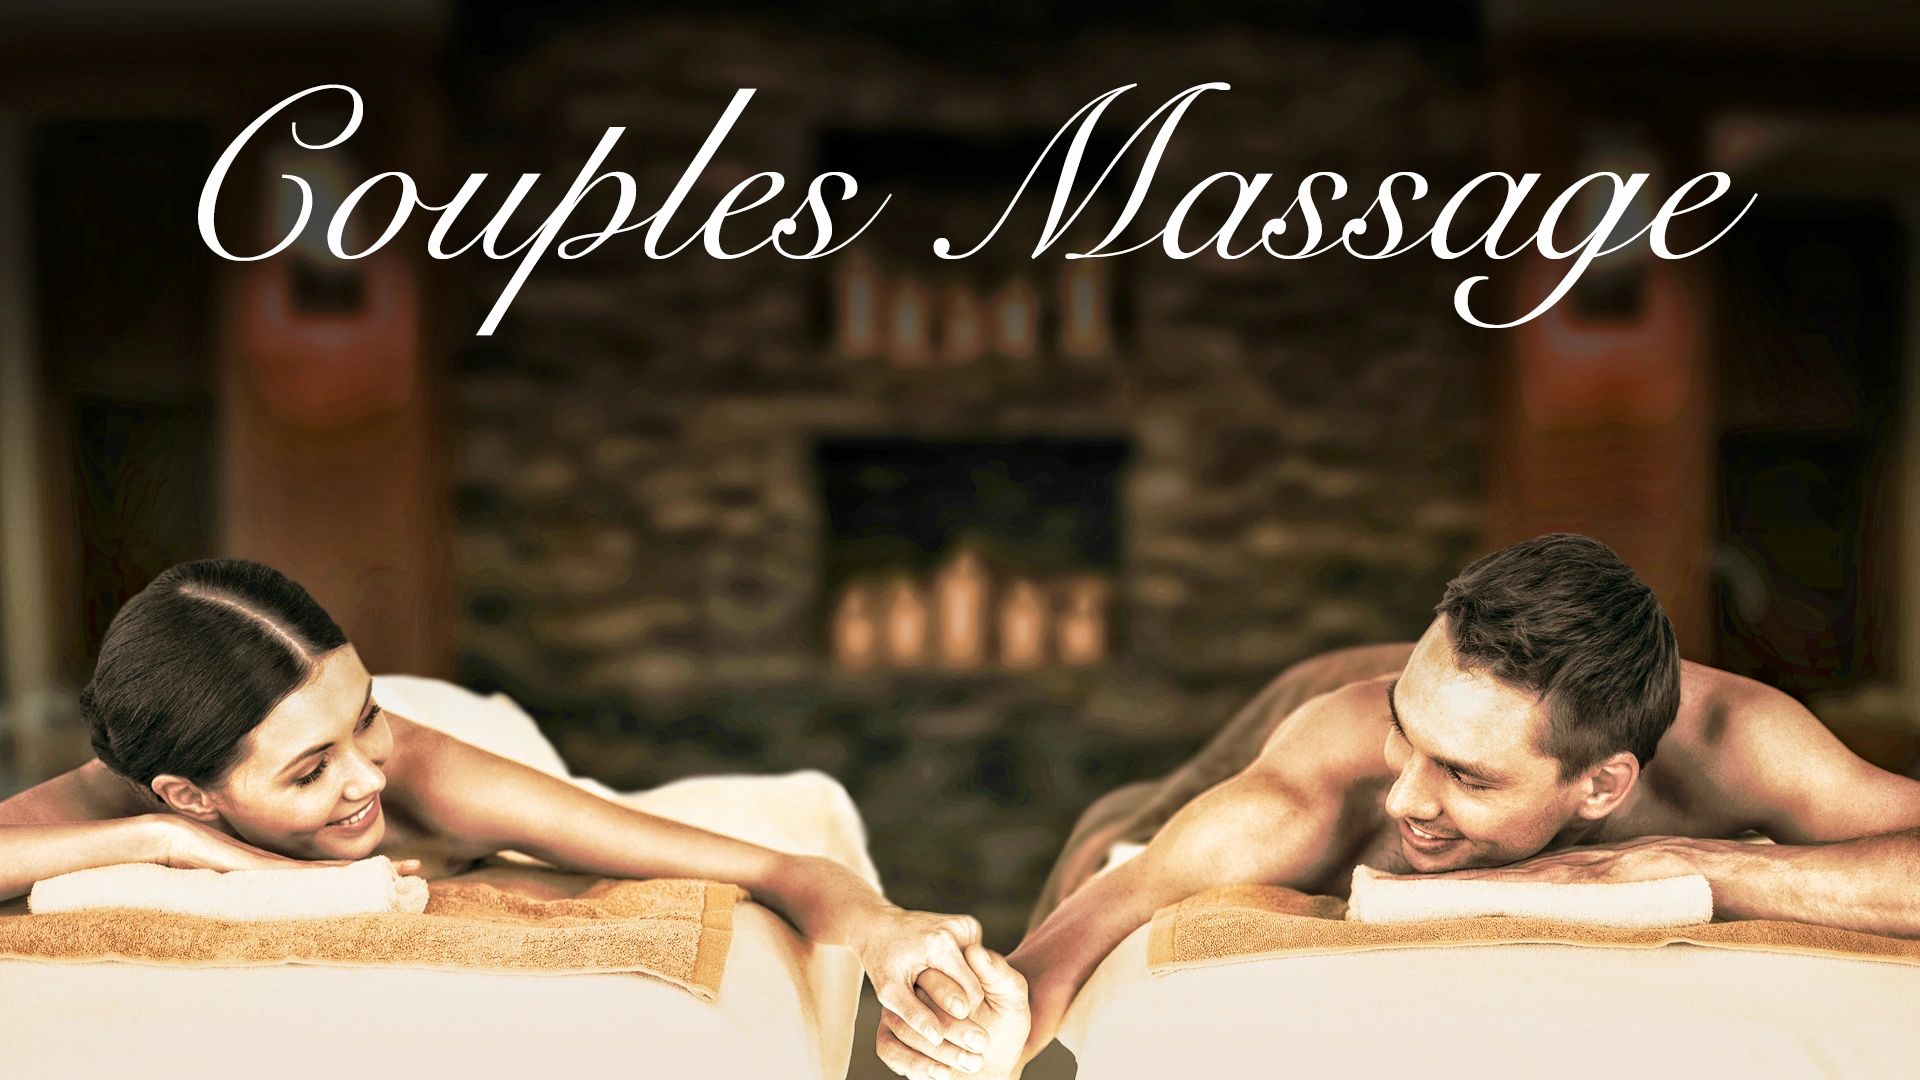 couples spa package central nj